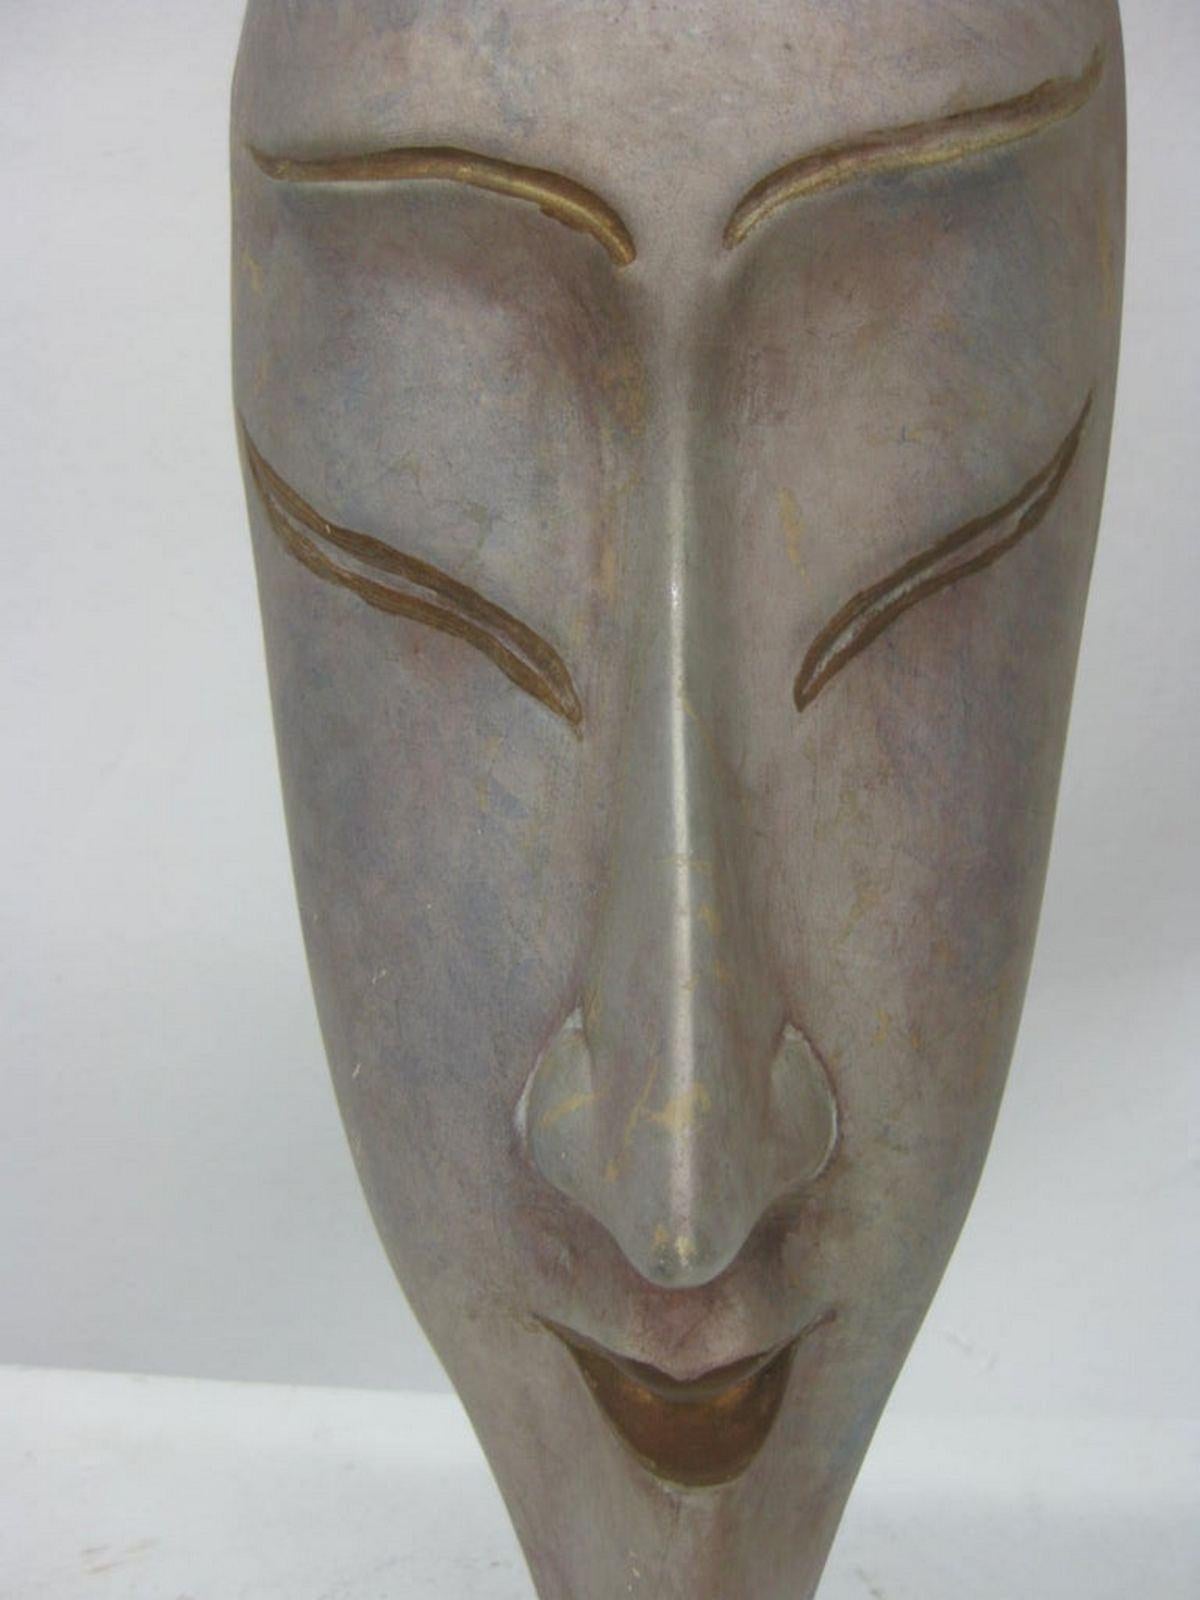 This hand-painted mask features a female long face. Gold accents that highlight lips and eyes suggest Japanese culture.
It is resting on a clear Lucite-mounted base.